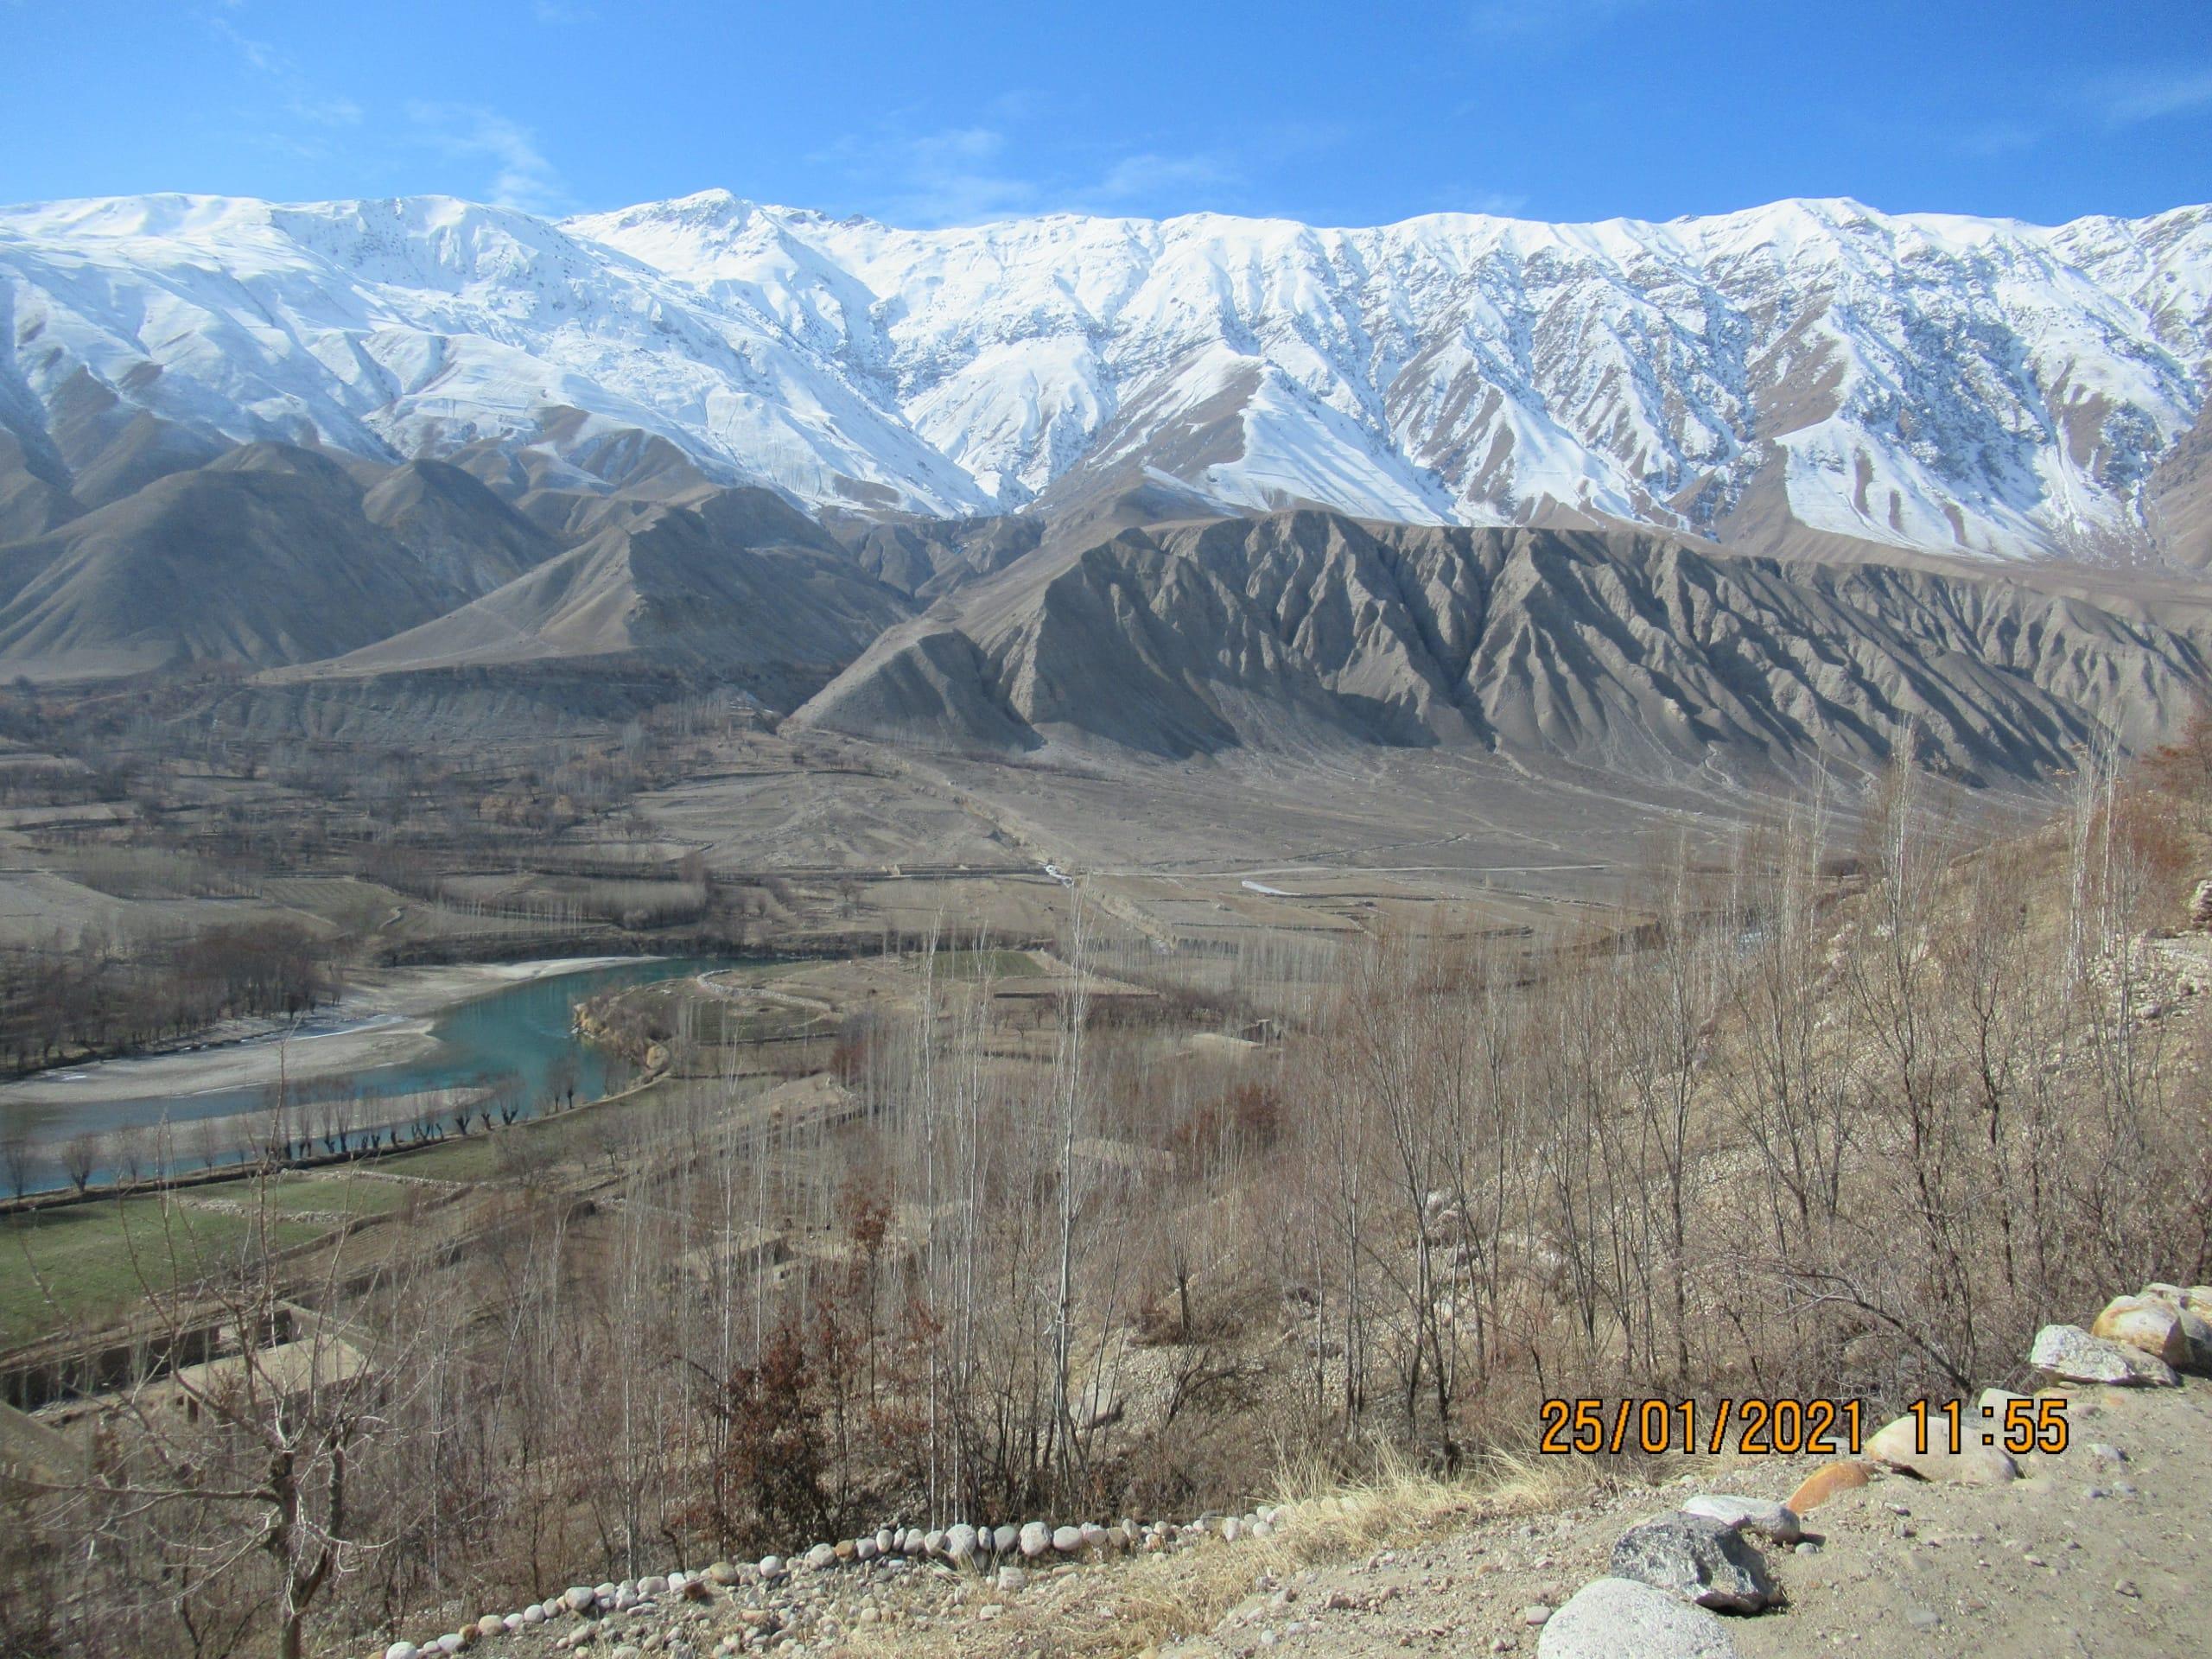 Beautiful Afghanistan and its difficult topography for building a reliable national grid.